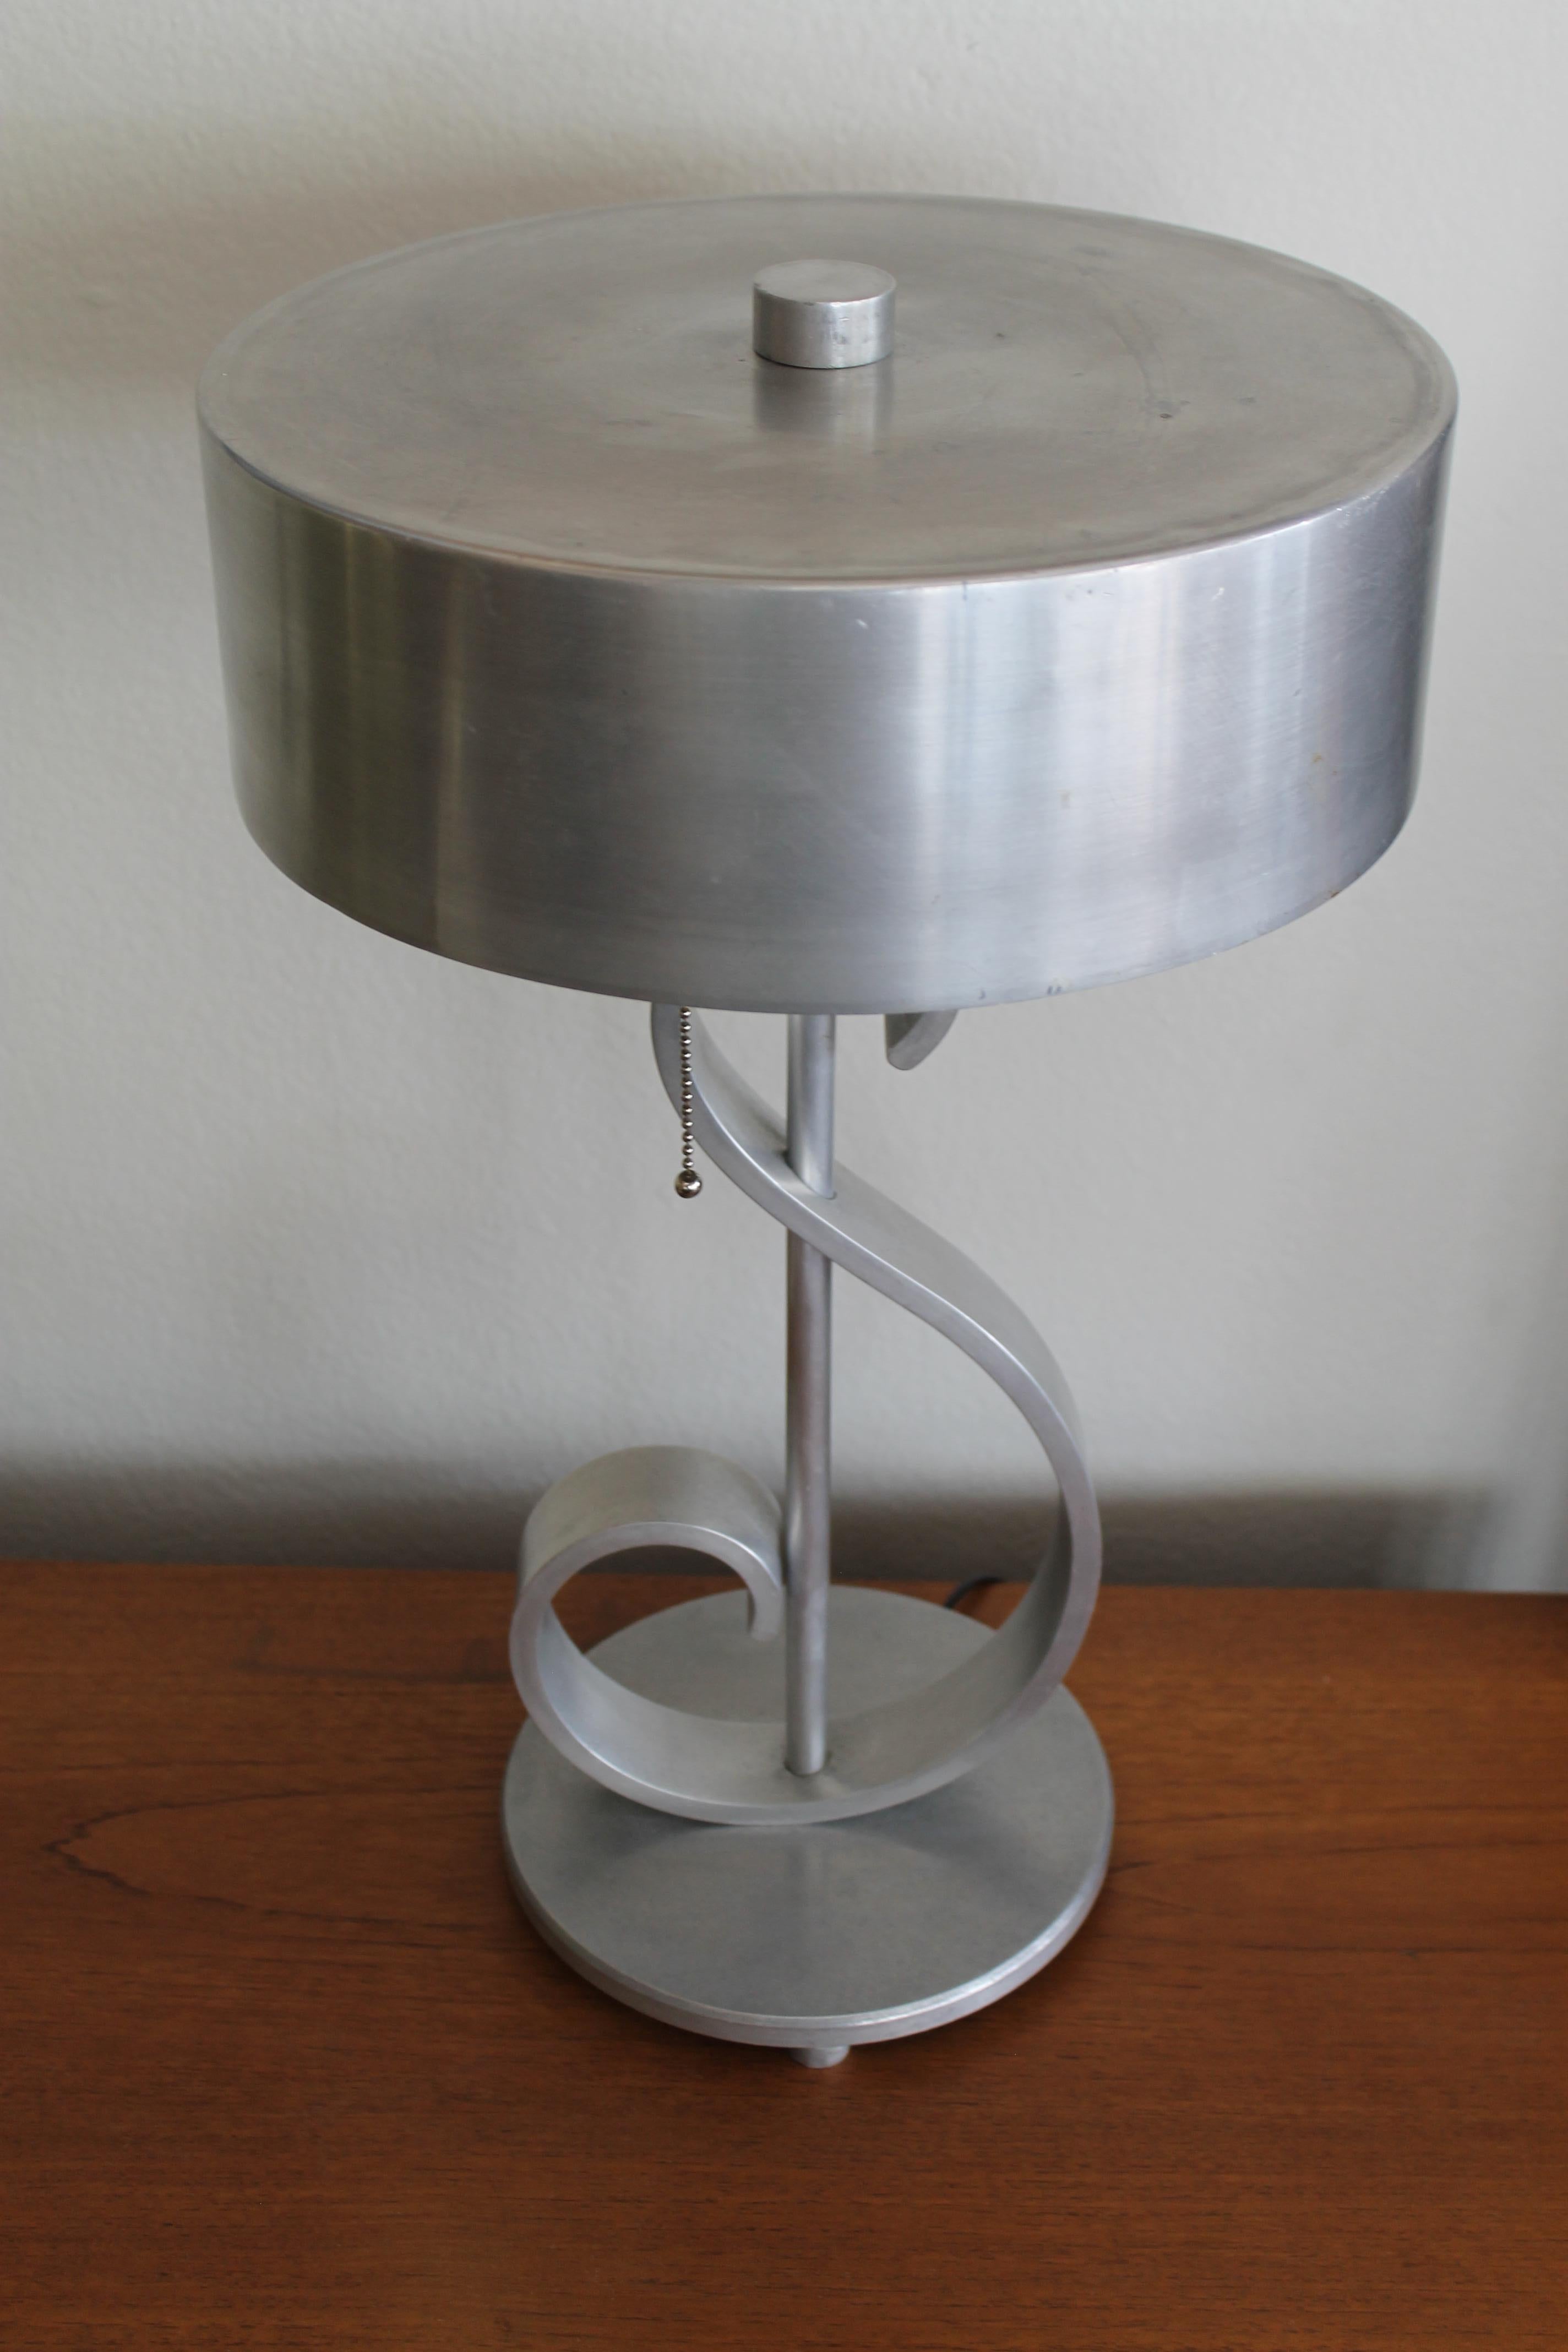 Aluminum musical note table lamp with original shade and finial. Lamp has been professionally rewired with an in-line switch and pull chains. Lamp (with shade) measures 20.5